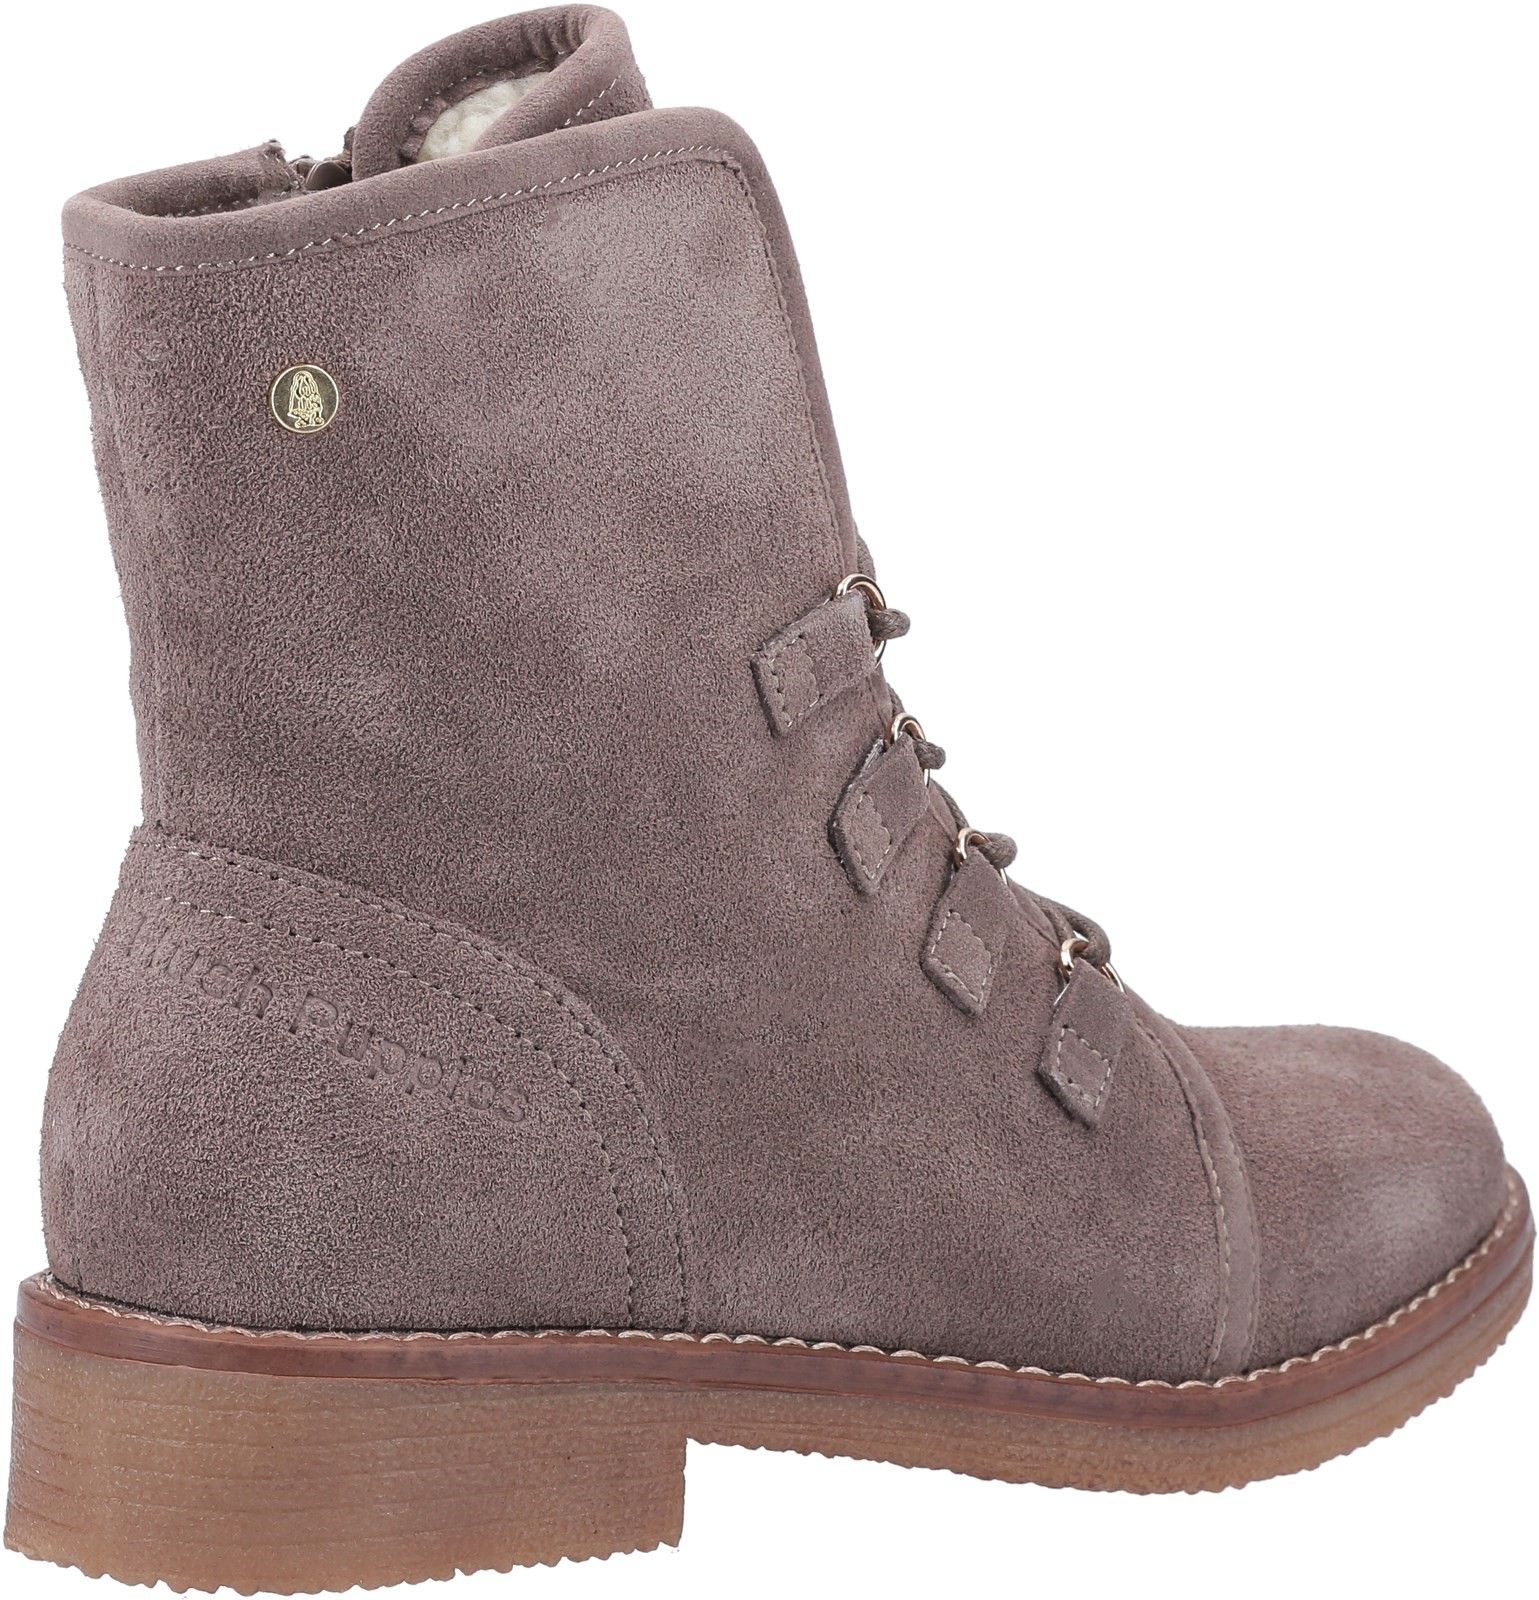 The Milo cosy fleece lined ladies boots from Hush Puppies will keep you warm all winter with the fleece lined collar able to be worn up or down and the water resistant suede will keep you looking stylish no matter what weather you run in toWater Resistant Suede Upper with Faux Shearling Collar. 
Collar can be Worn Up or Down. 
Lace Up Fastening for the Perfect Fit. 
Hidden Inside Zip for Ease. 
Super Warm, Cosy and Comfortable Textile Lining.